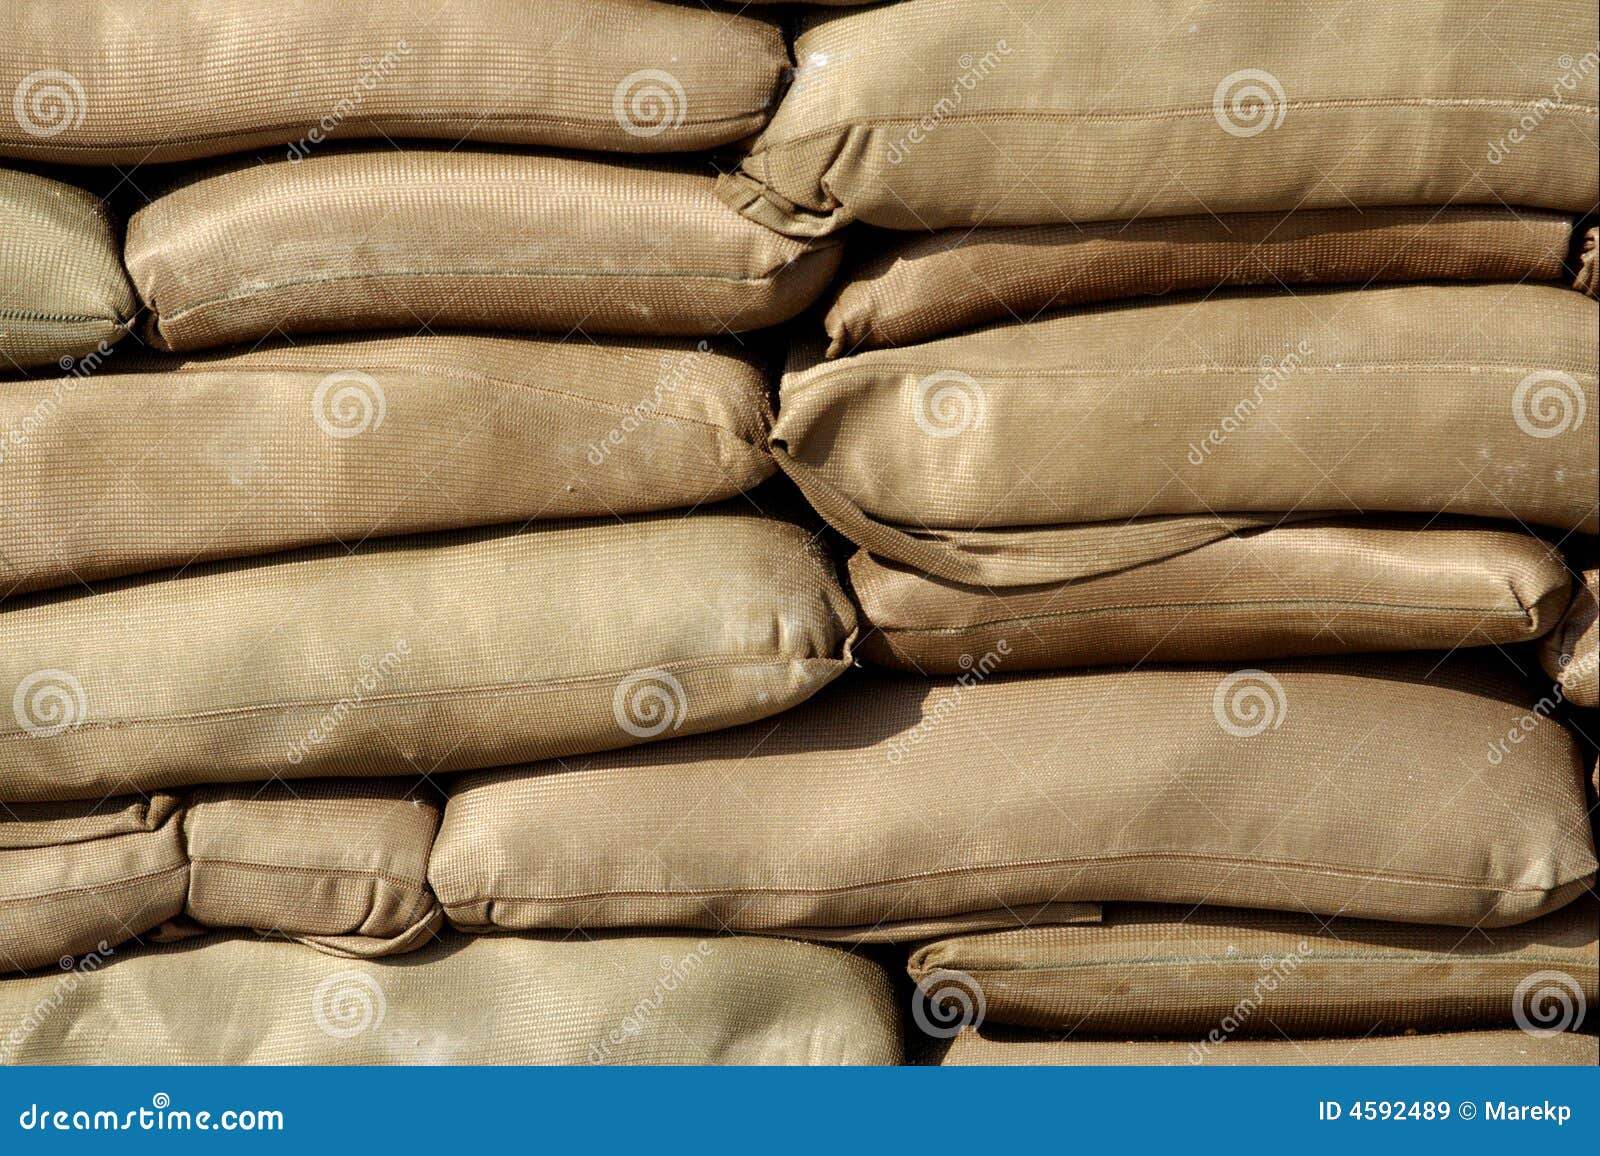 Sand Bags Stock Illustrations – 856 Sand Bags Stock Illustrations, Vectors  & Clipart - Dreamstime